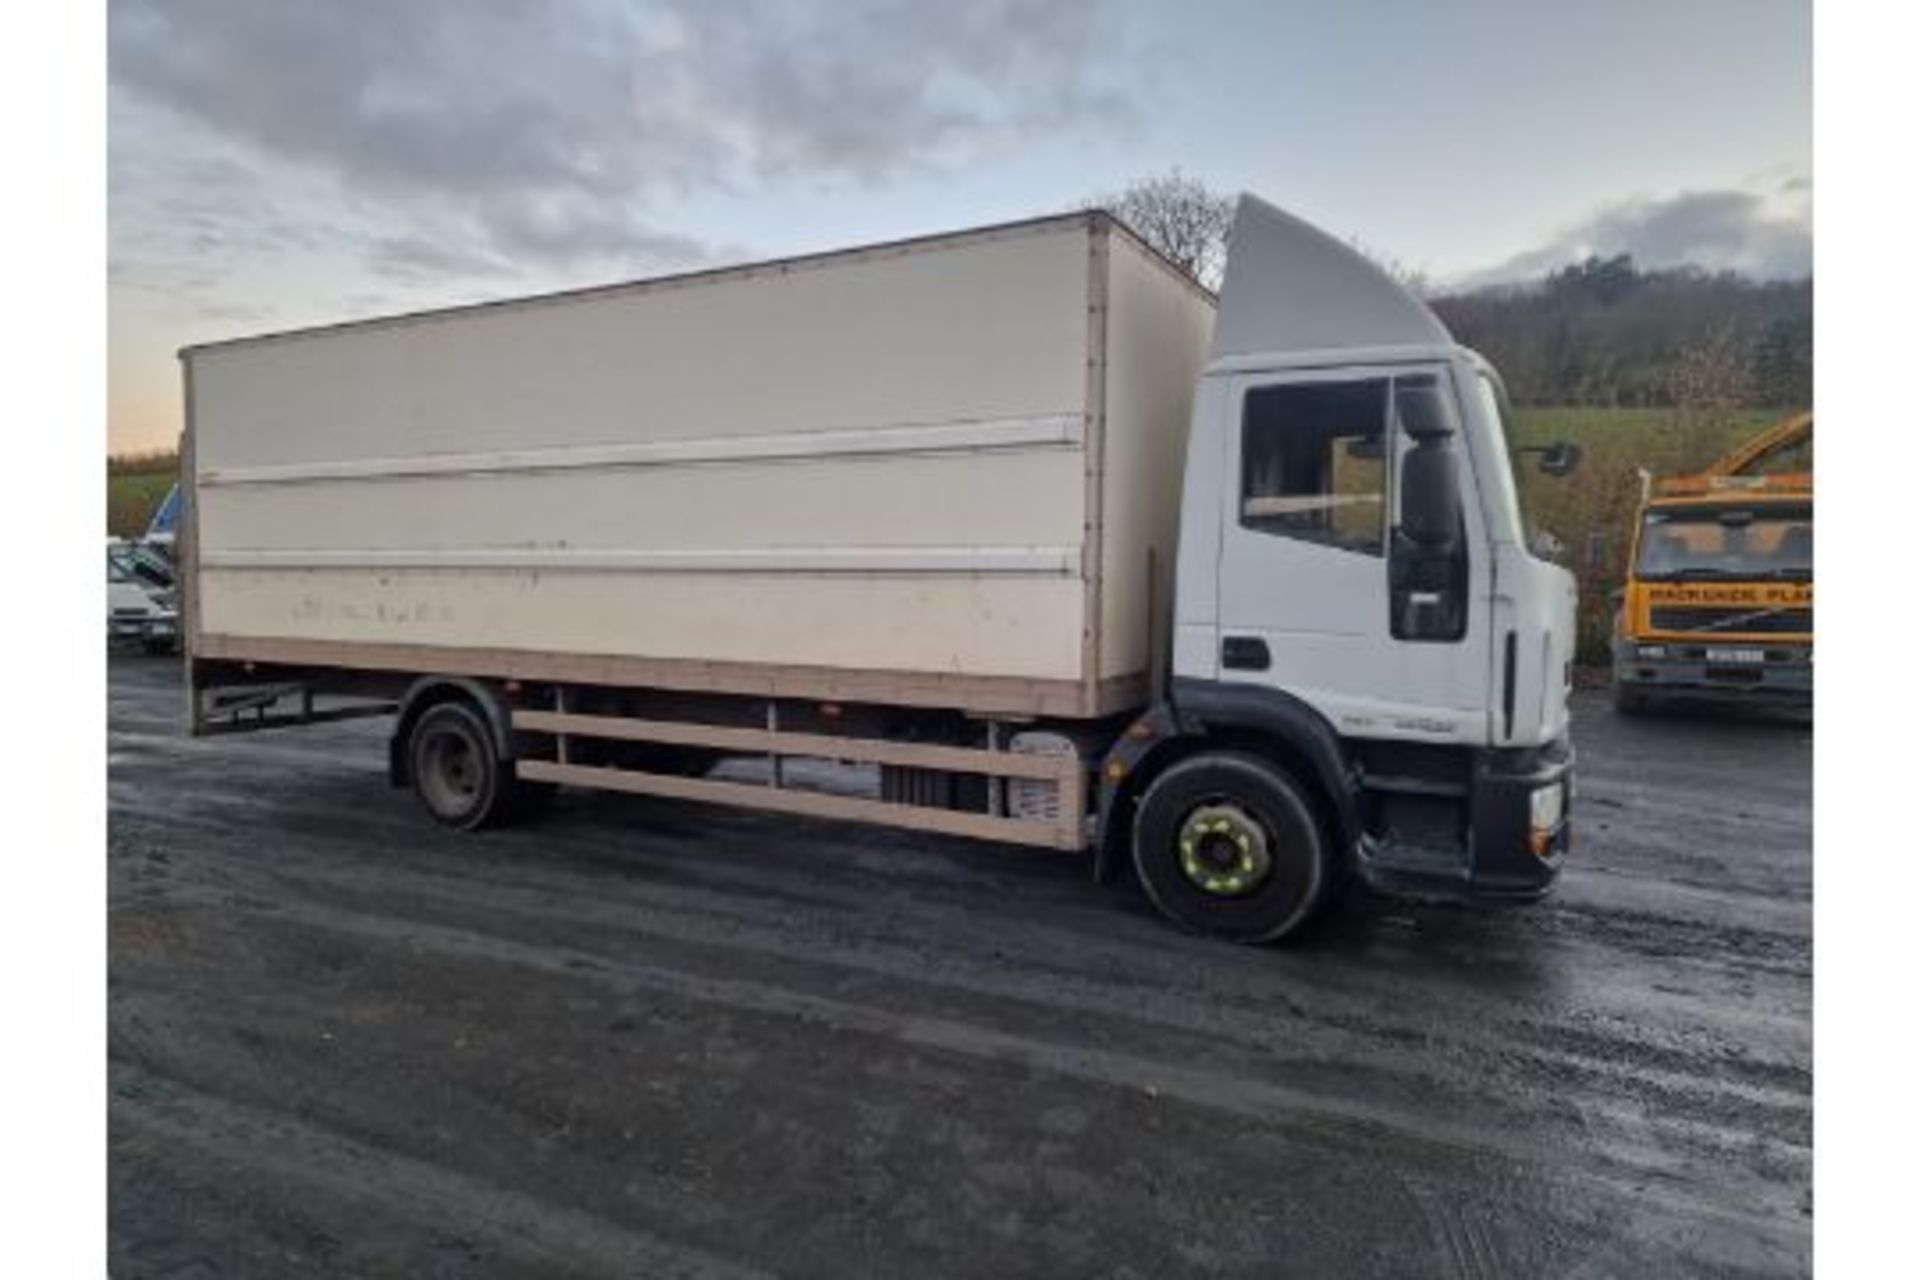 10/60 IVECO EUROCARGO (MY 2008) - 5880cc 2dr Lorry (White)